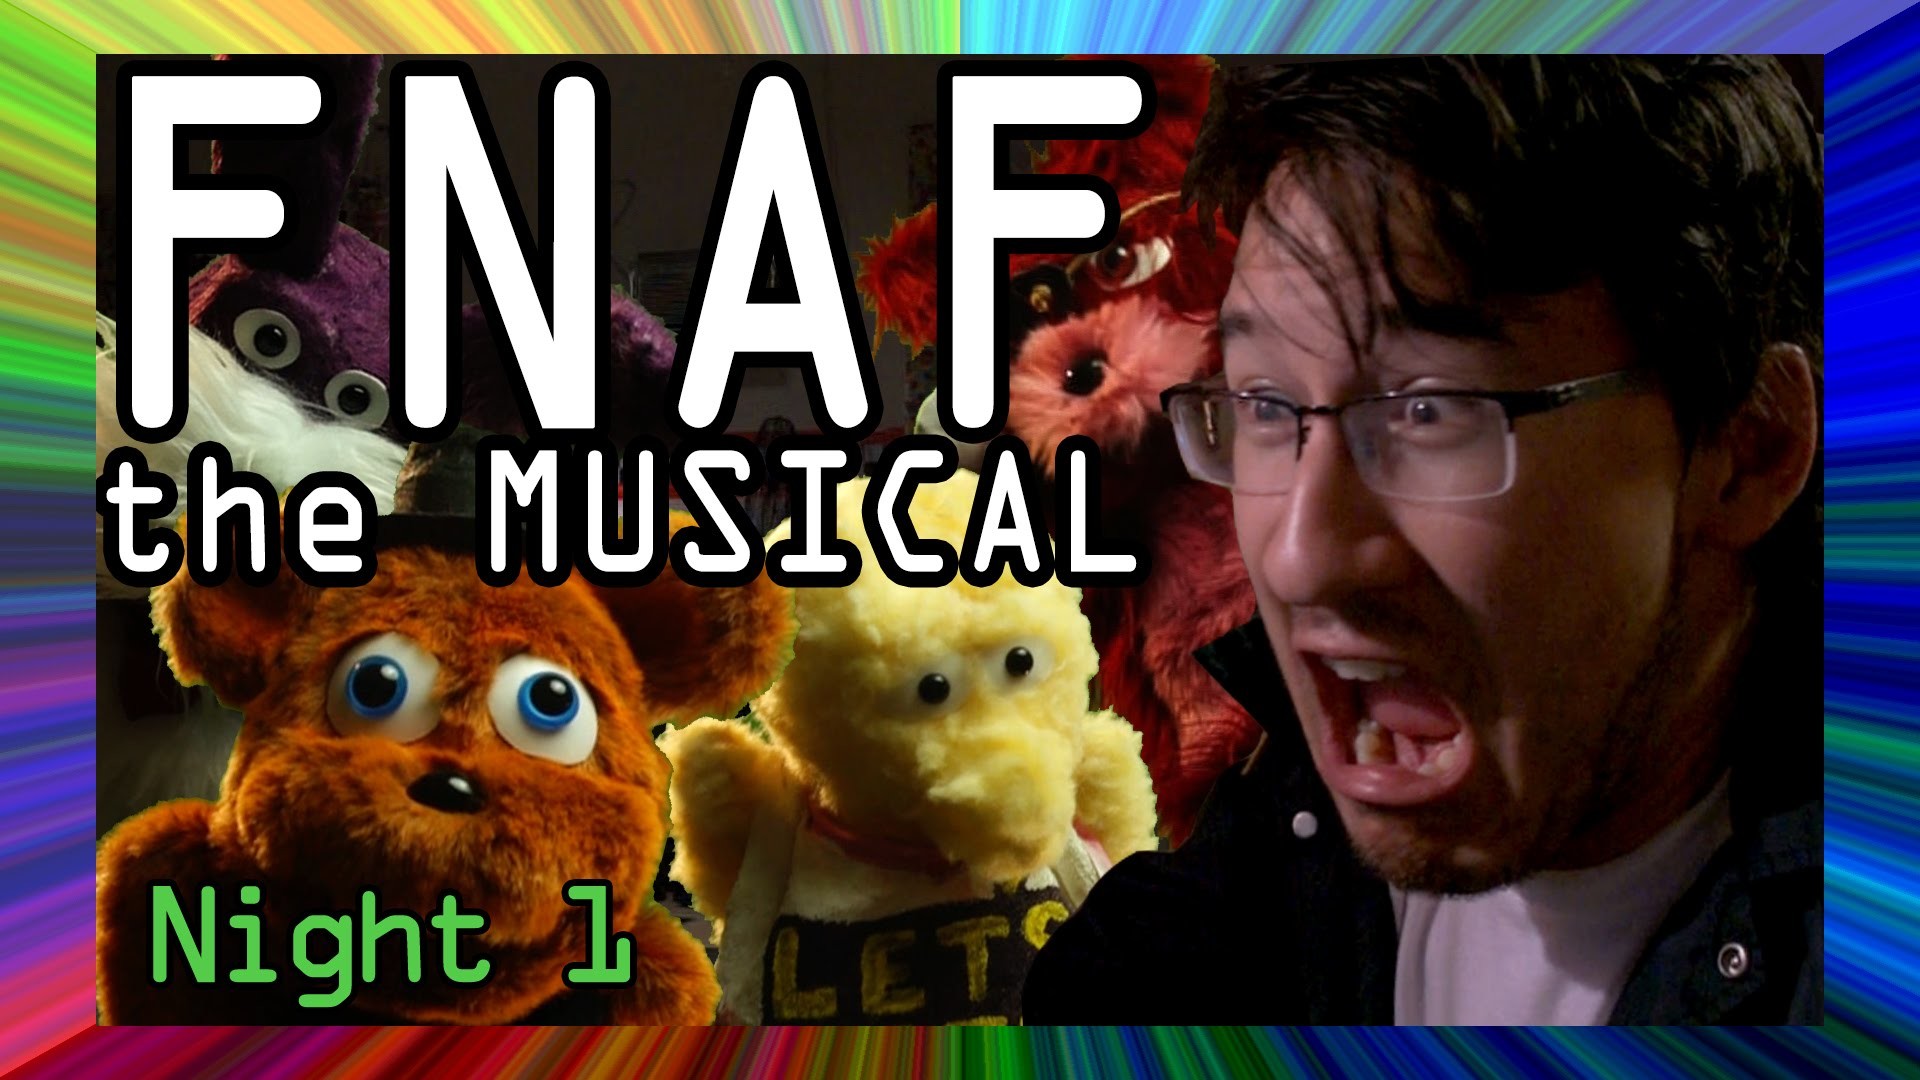 1920x1080 Five Nights at Freddy's: The Musical - Night 1 (Feat. Markiplier)